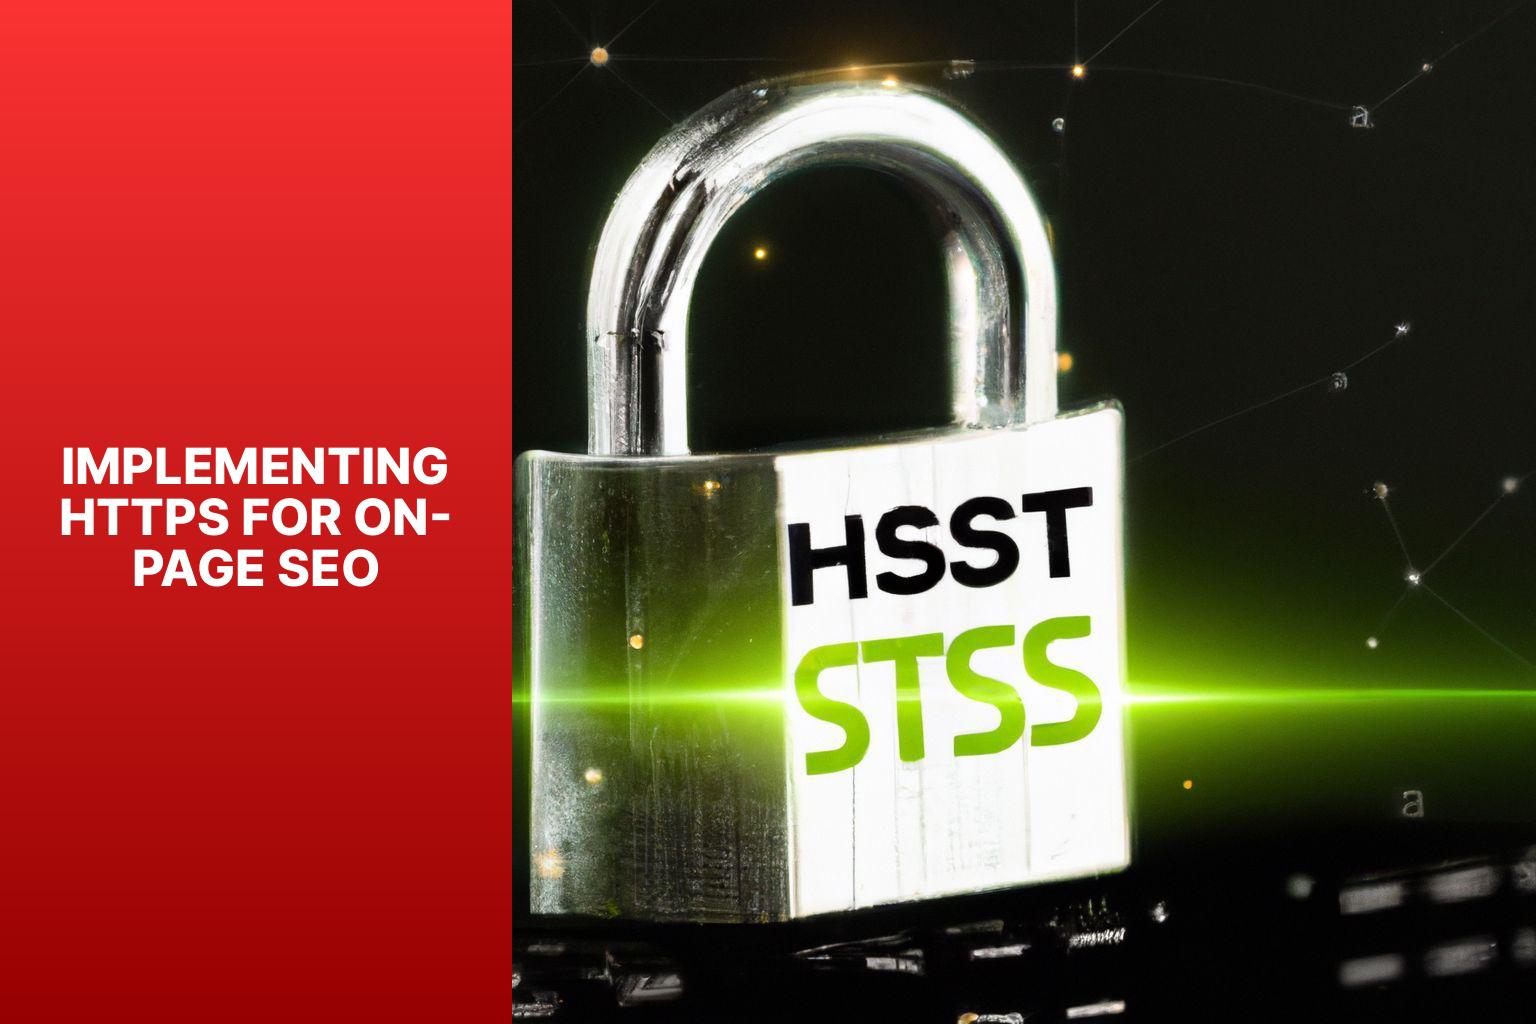 Implementing HTTPS for On-Page SEO - The Role of HTTPS in On-Page SEO 